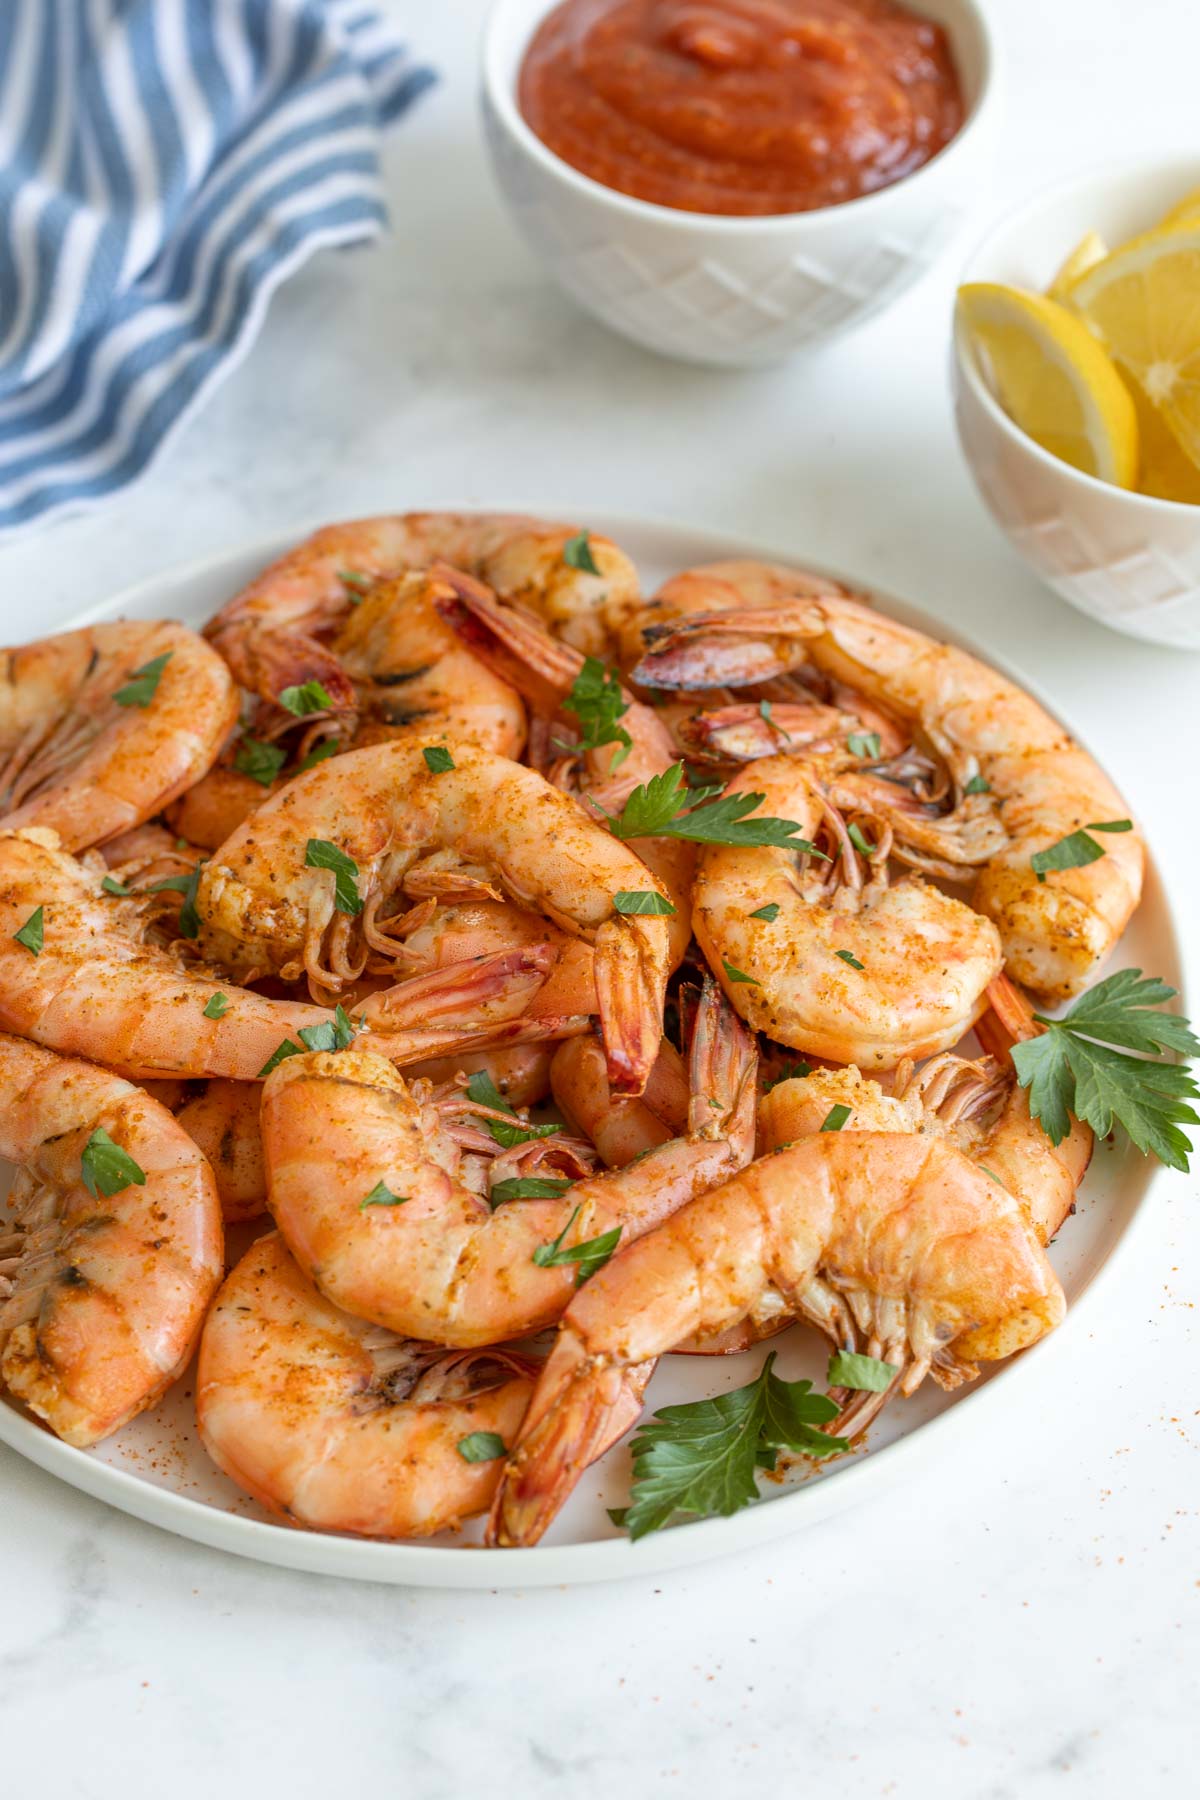 Closeup view of a plate of old bay steamed shrimp sprinkled with parsley.